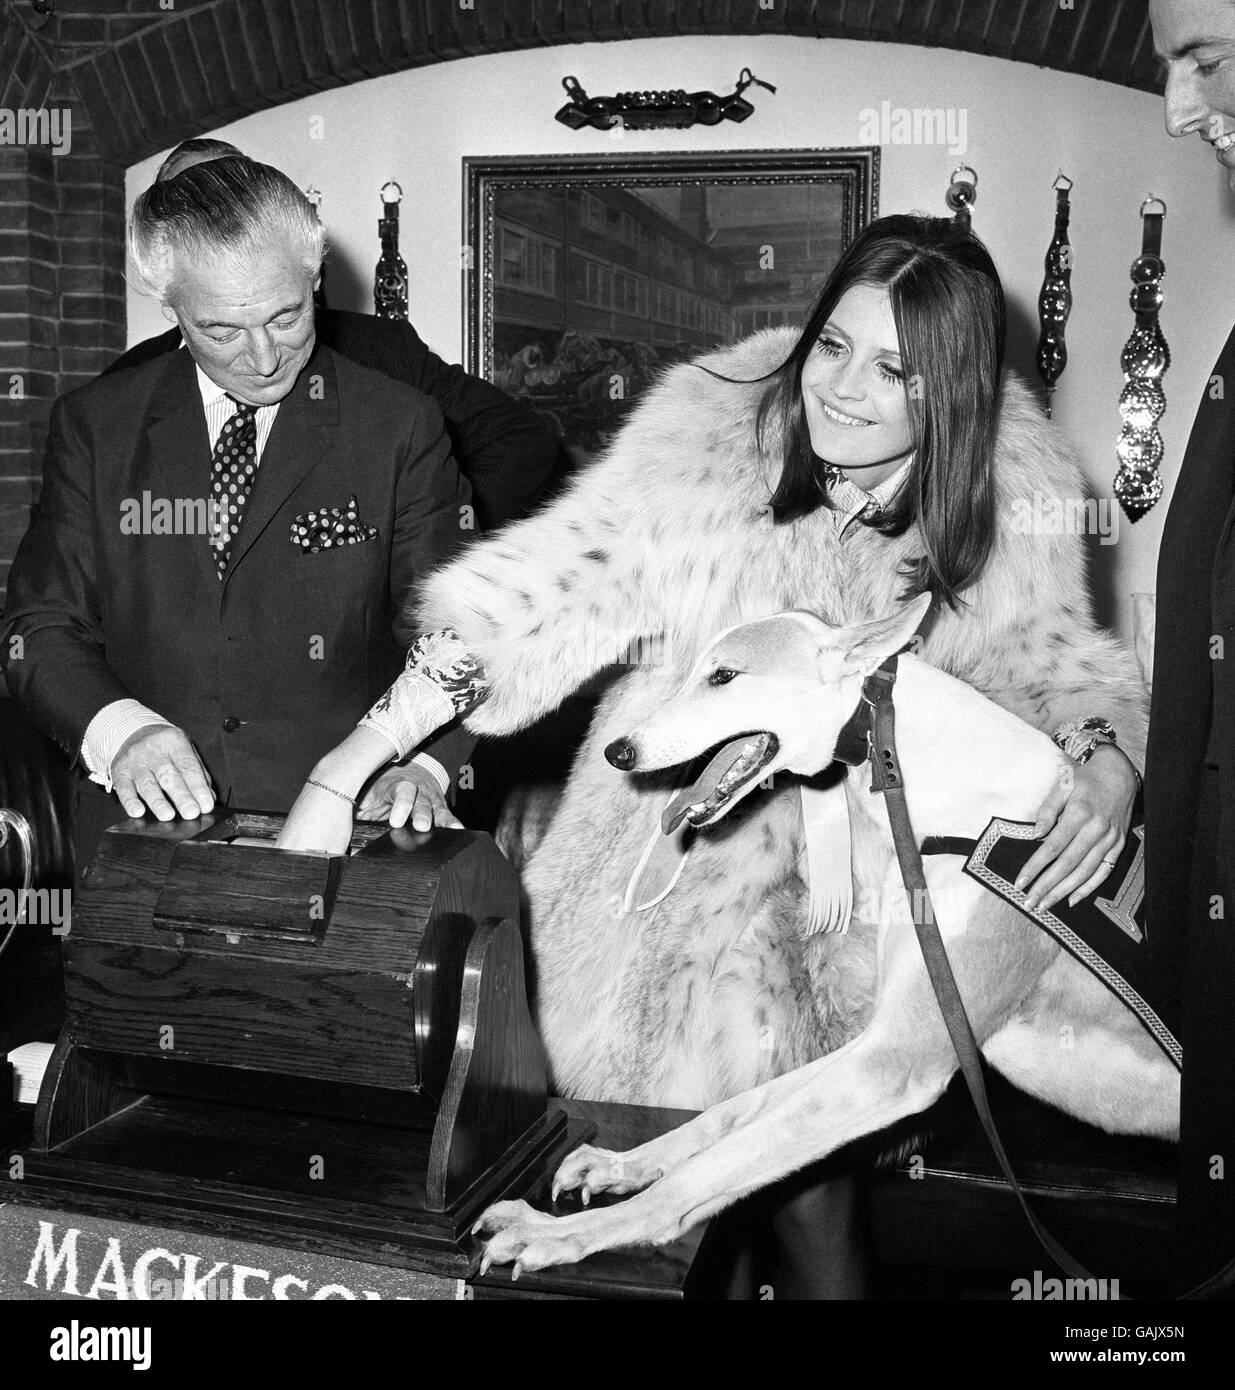 Pop star Sandie Shaw making the draw for the first round of the 7000 pound Mackeson Greyhound Championship at Whitbread's City Cellars, with Major Percy Brown, the Greyhound Racing Association's Director of Racing, and the Duke of Edinburgh's greyhound, Camira Flash, winner of the 1968 Greyhound Derby. Stock Photo